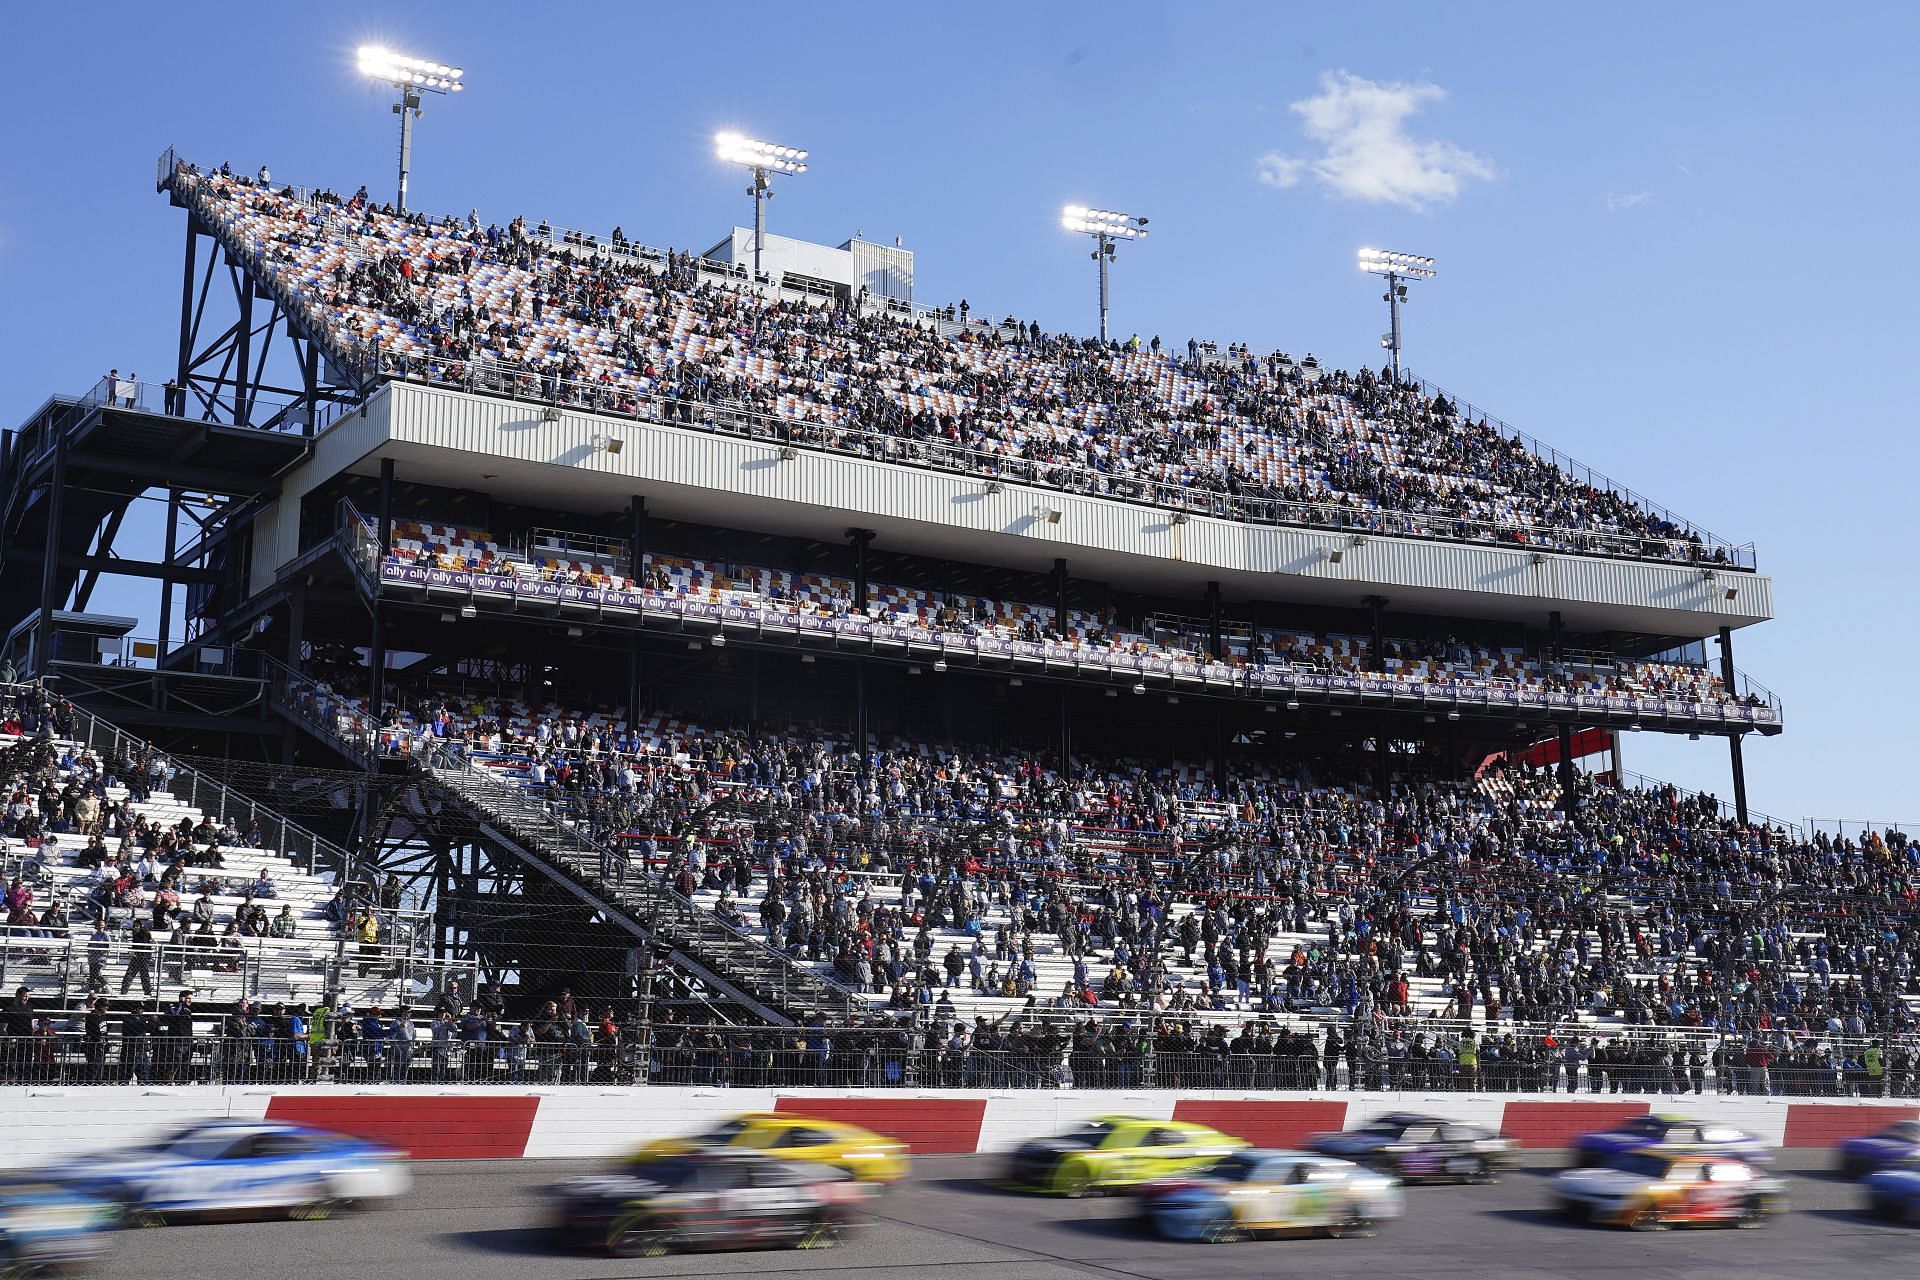 Cars fly past the grandstands during the 2022 NASCAR Cup Series Toyota Owners 400 at Richmond Raceway in Richmond, Virginia (Photo by Jacob Kupferman/Getty Images)